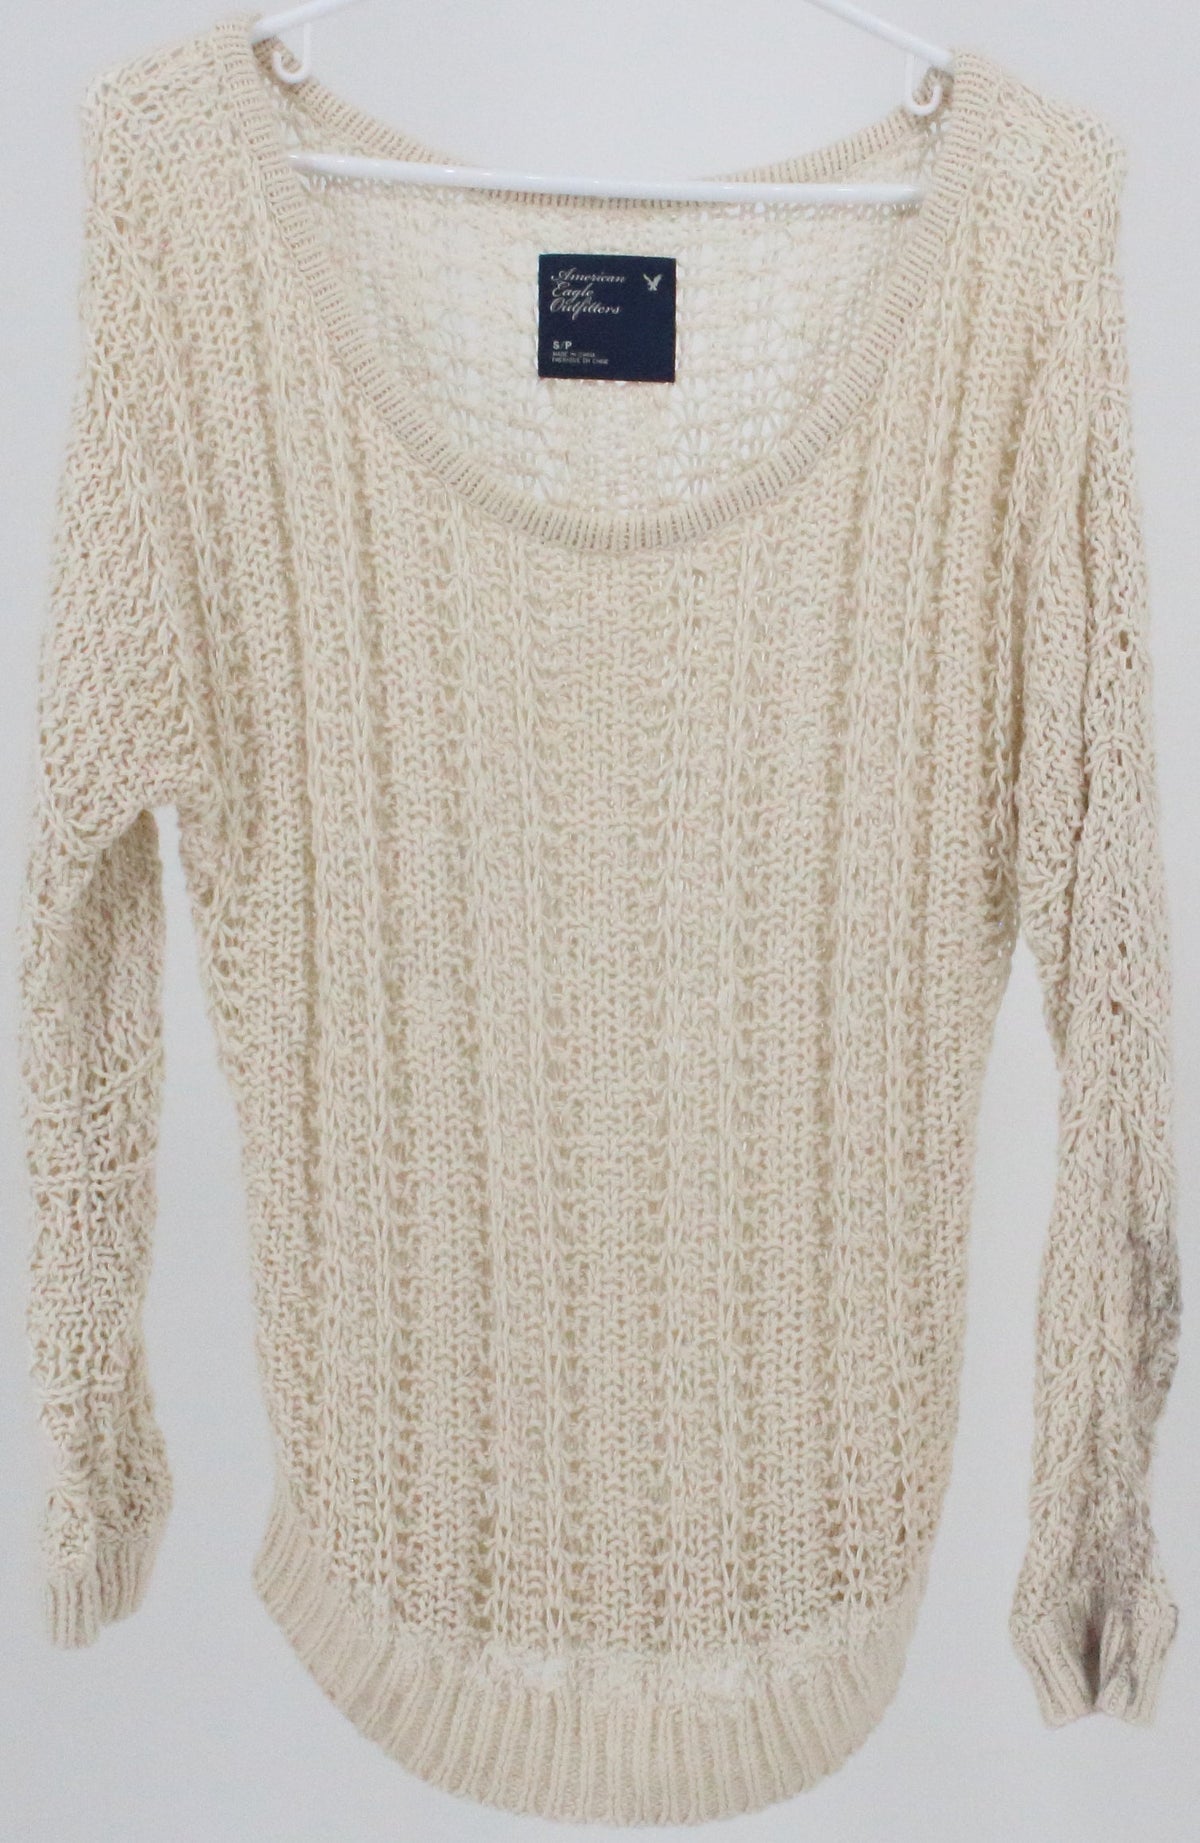 American Eagle Outfitters Off White Crochet Long Sleeve Top